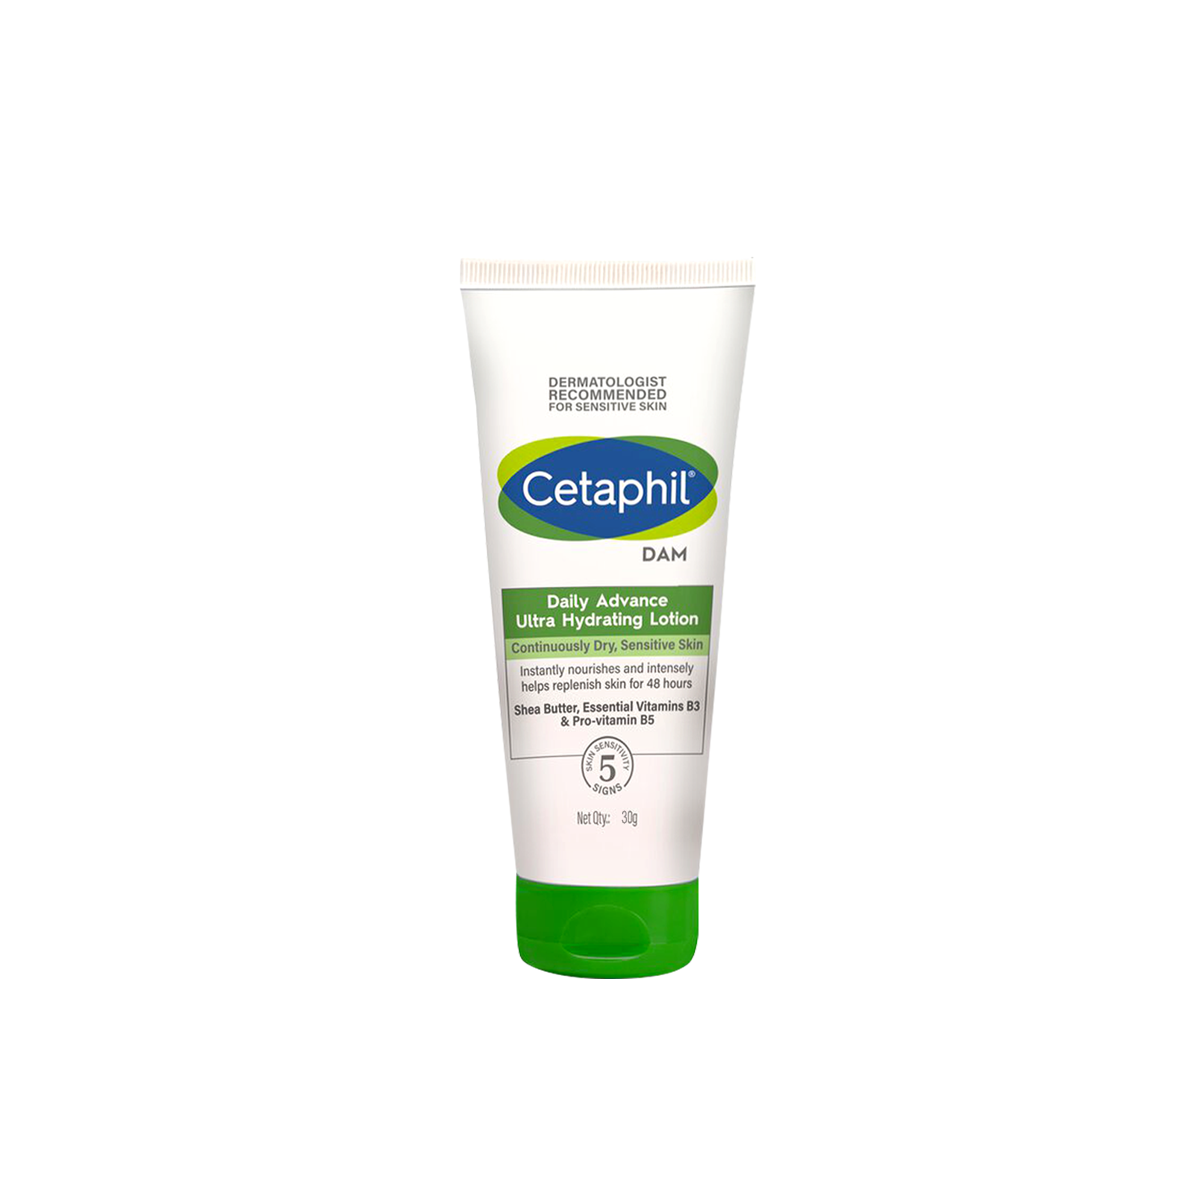 First product image of Cetaphil DAM Daily Advance Hydrating Lotion 30g